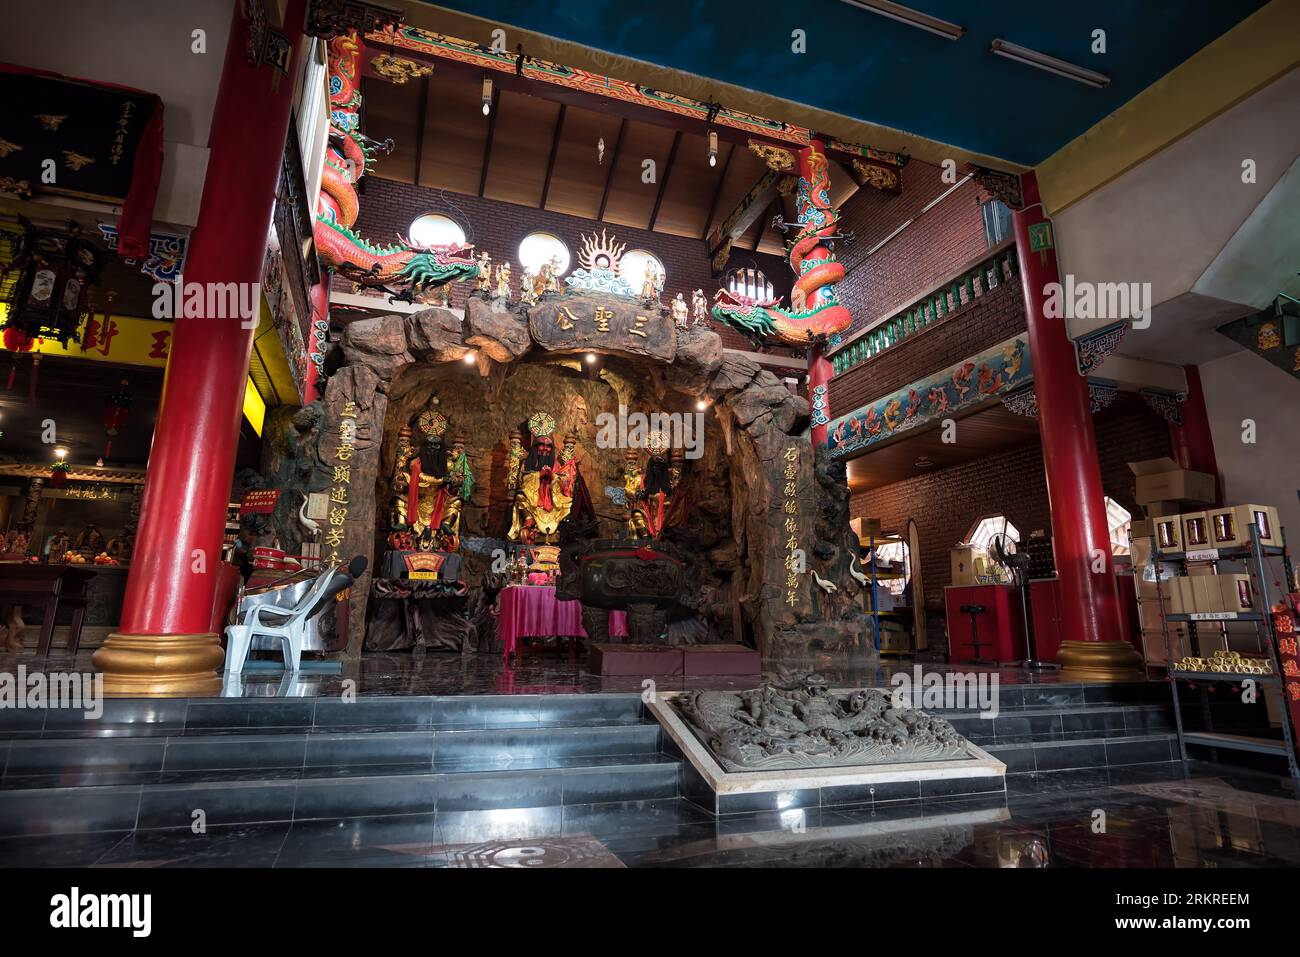 Yong Peng, Malaysia - Feb 8, 2019: A grand scenic traditional colourful chinese Black Dragon Cave temple in Yong Peng;  Johor, Malaysia - The Black Dr Stock Photo